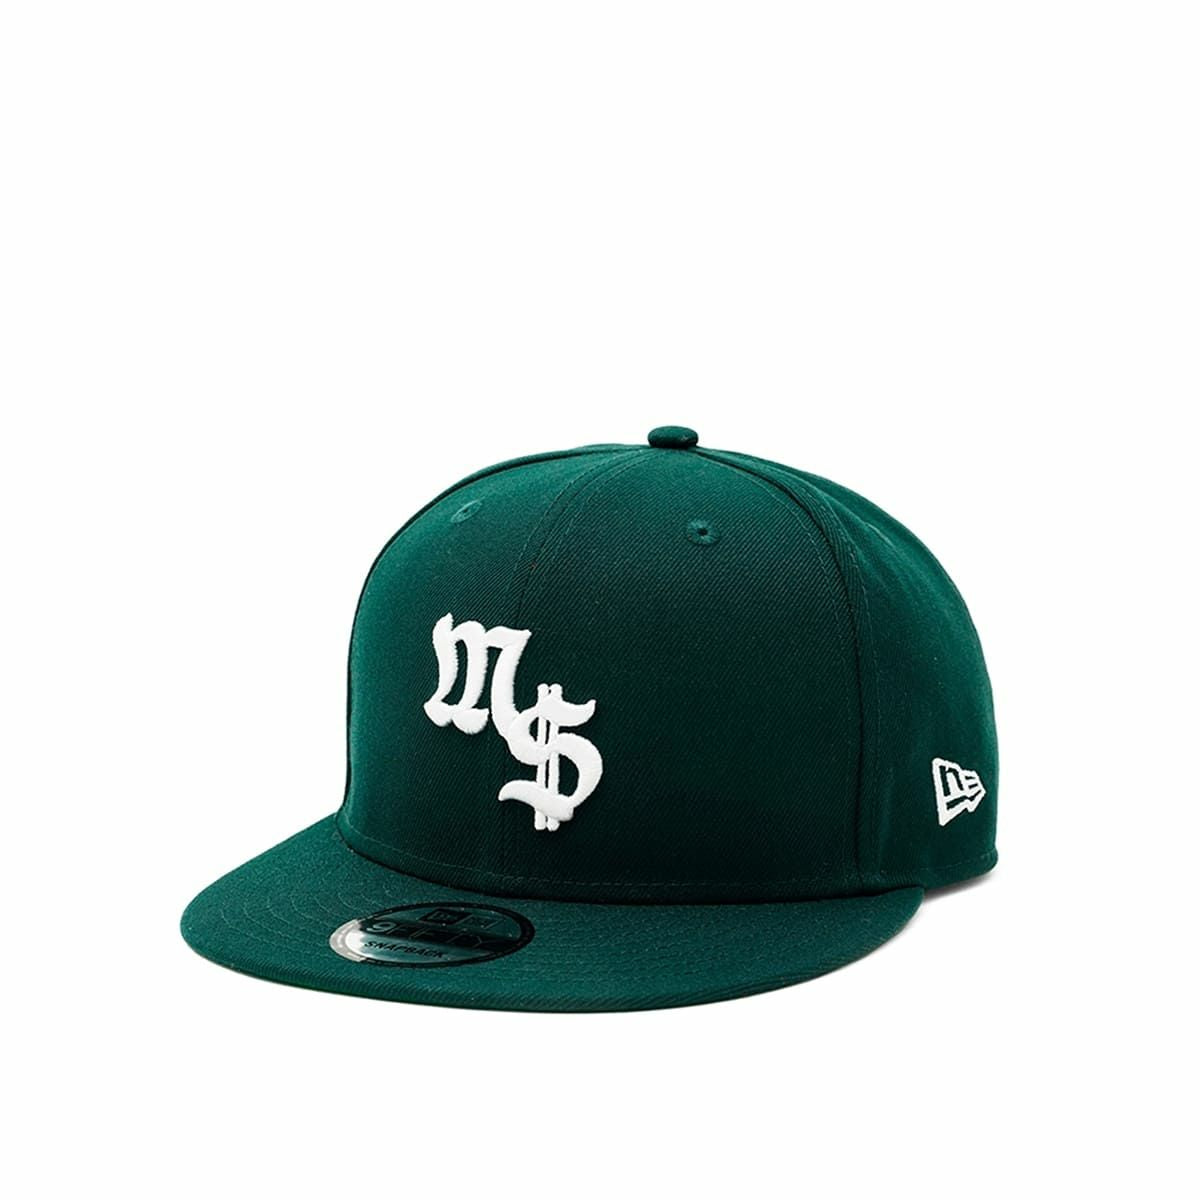 NEW ERA × MFC STORE SNAPBACK M＄ DICE FRAME 9FIFTY【13357972】